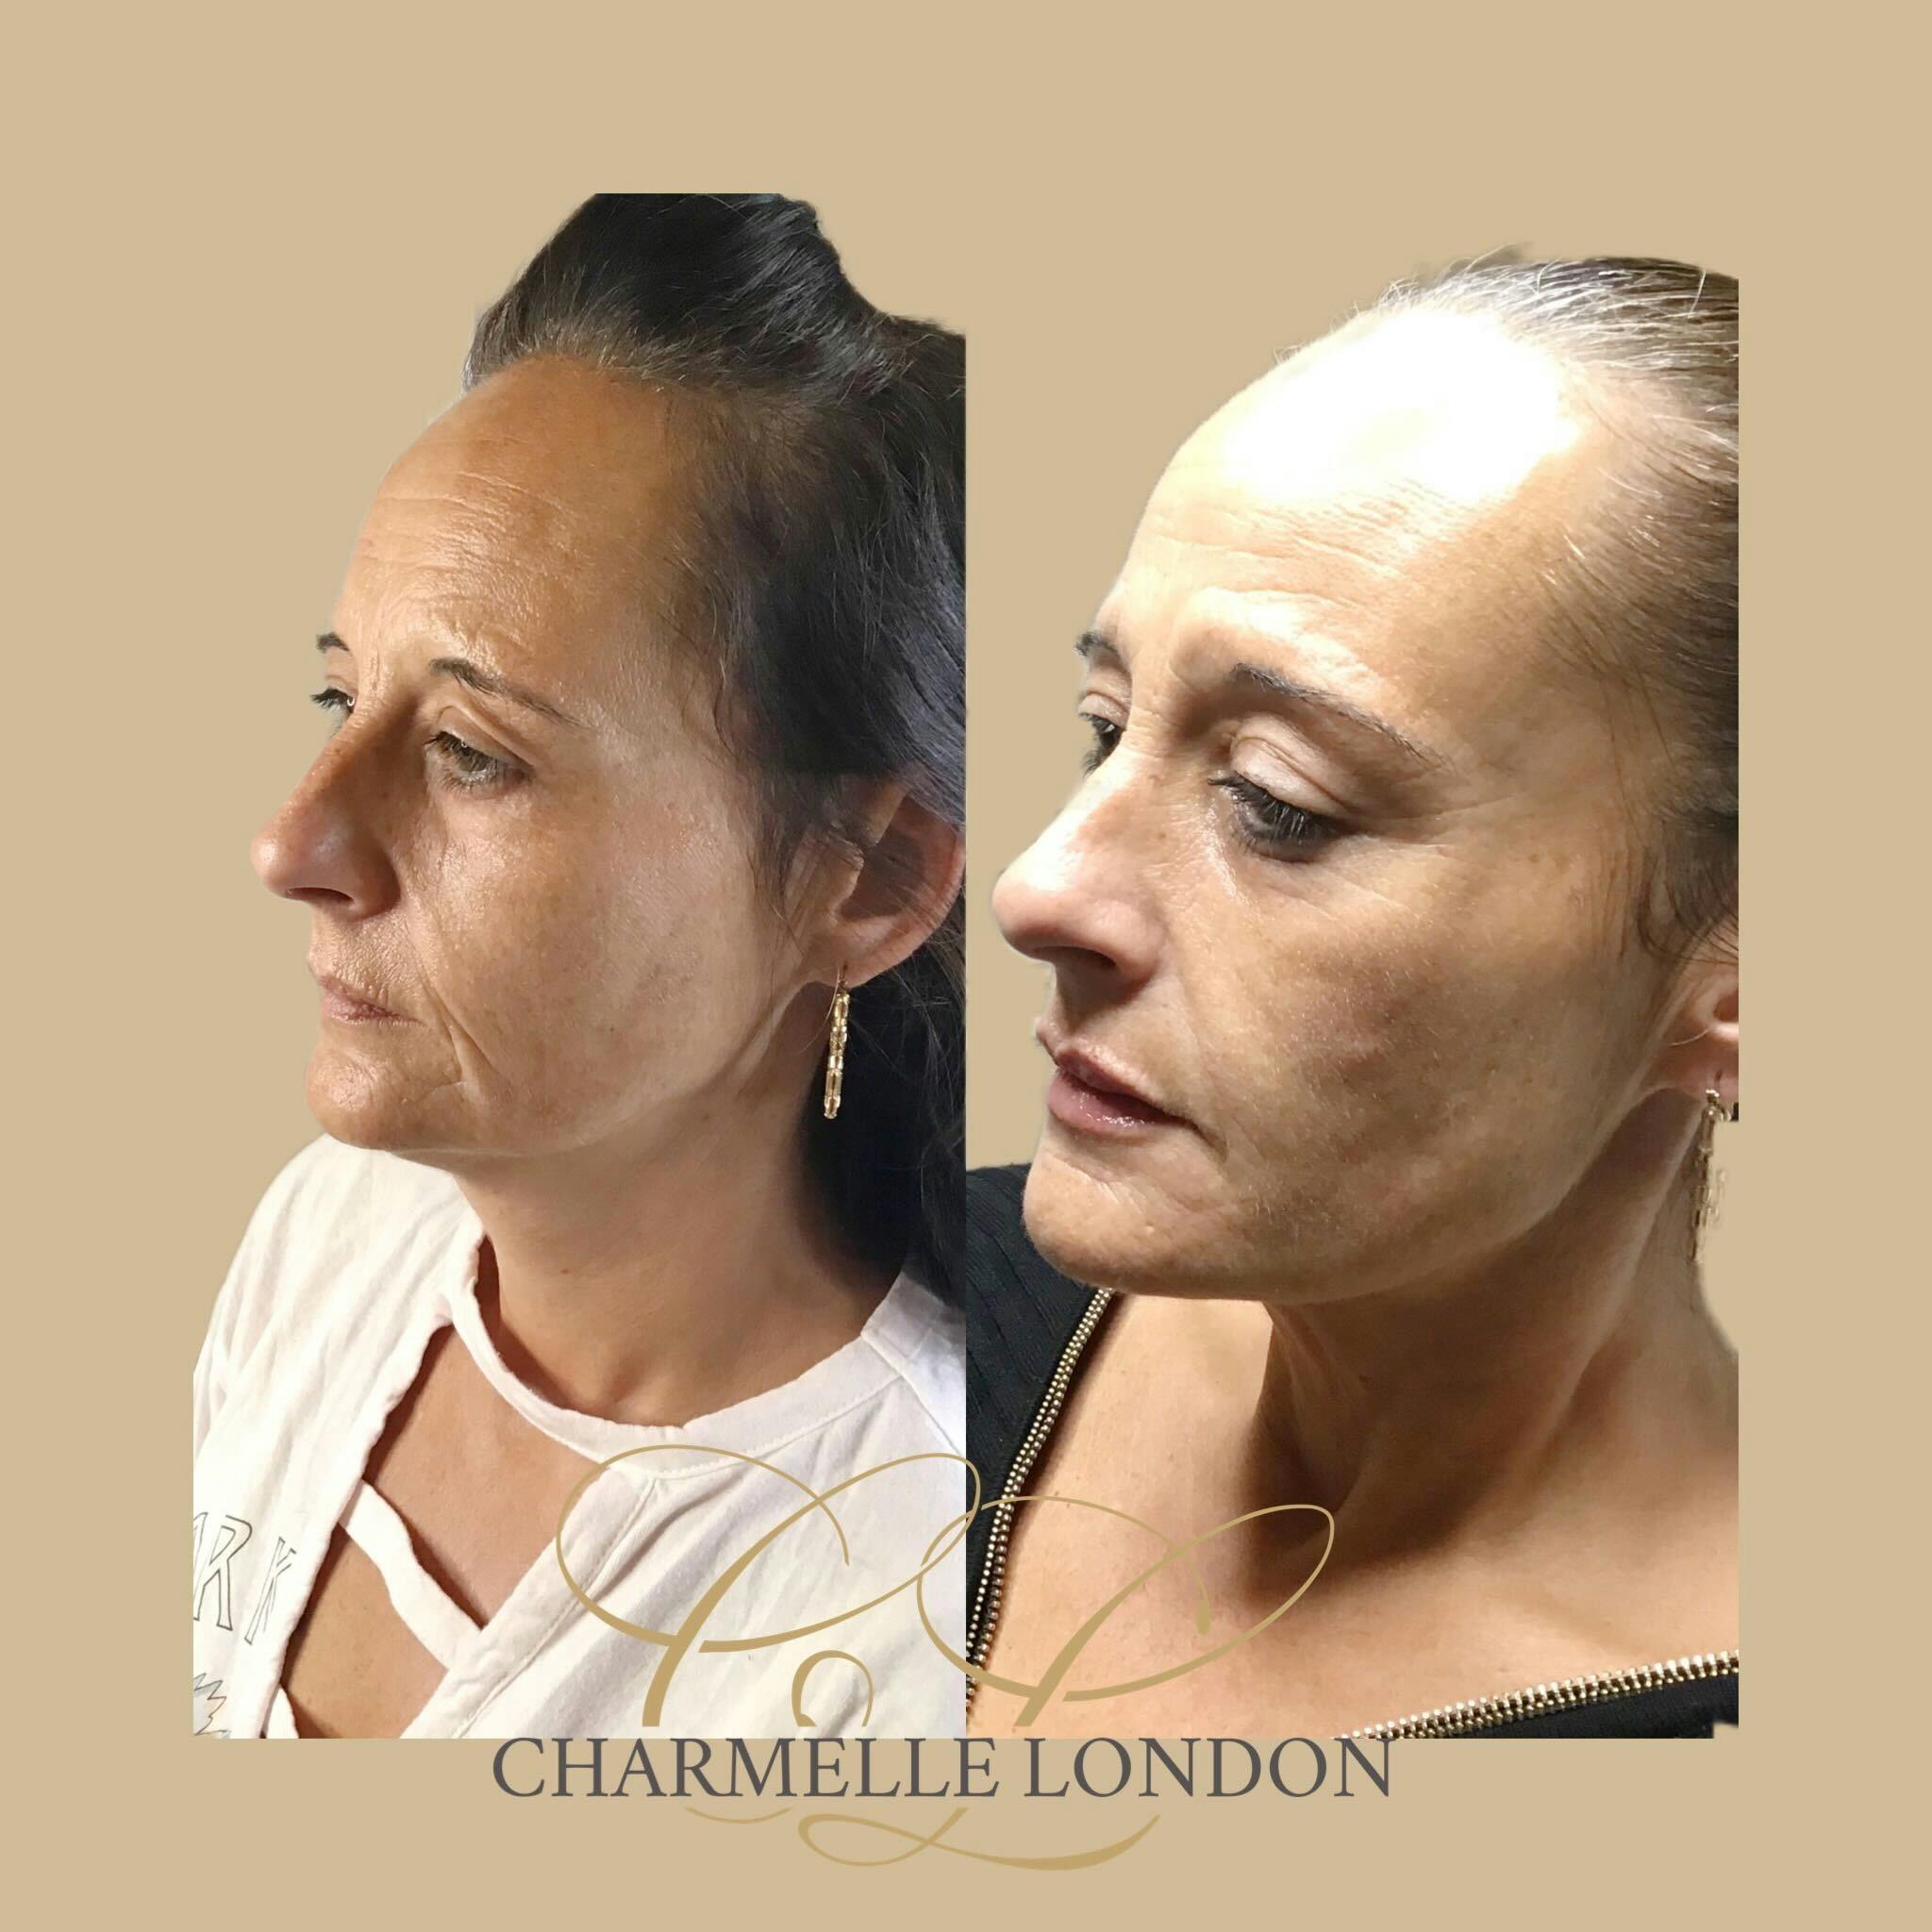 Experience emboldened confidence after receiving a skin boosting enhancement at Charmelle London. Enhance your appearance with a service dedicated to you, administered safely by experts.

With skin boosters you can rejuvenate your appearence to reveal a fresher looking you, plump fine lines and hydrate your skin.

Skin boosters are a versatile treatment option and are suitable for anyone looking to hydrate, plump and smooth their skin